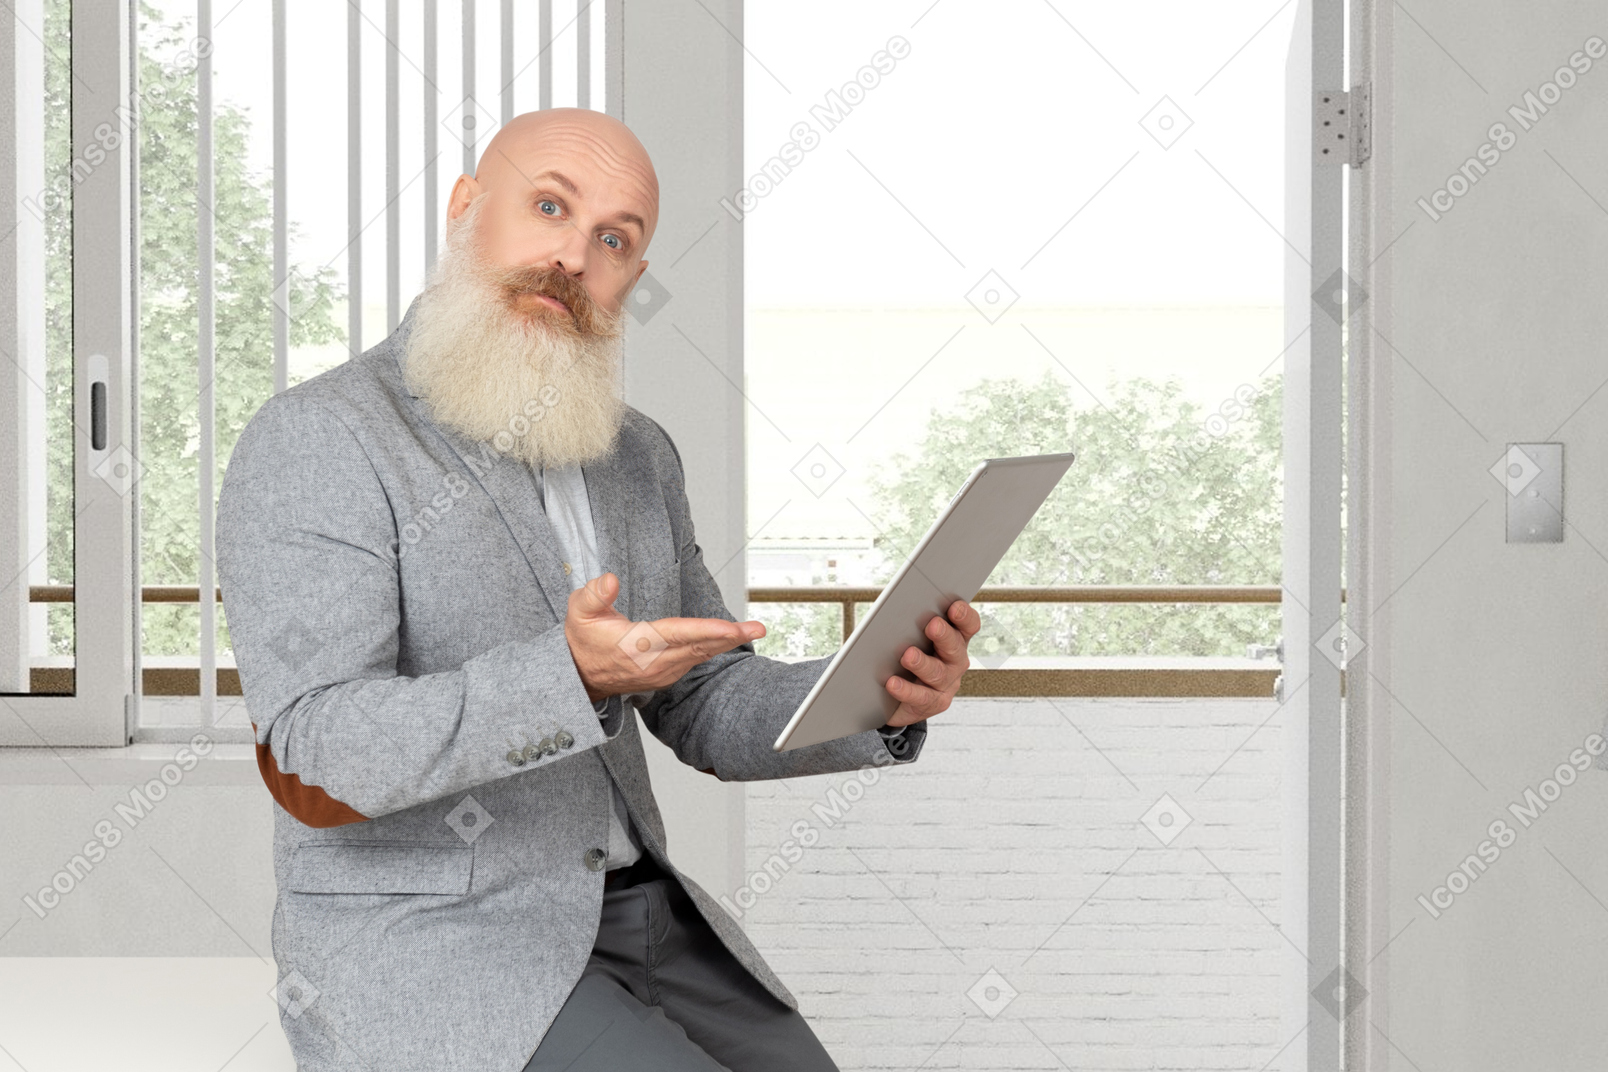 A bald man in a suit holding a tablet